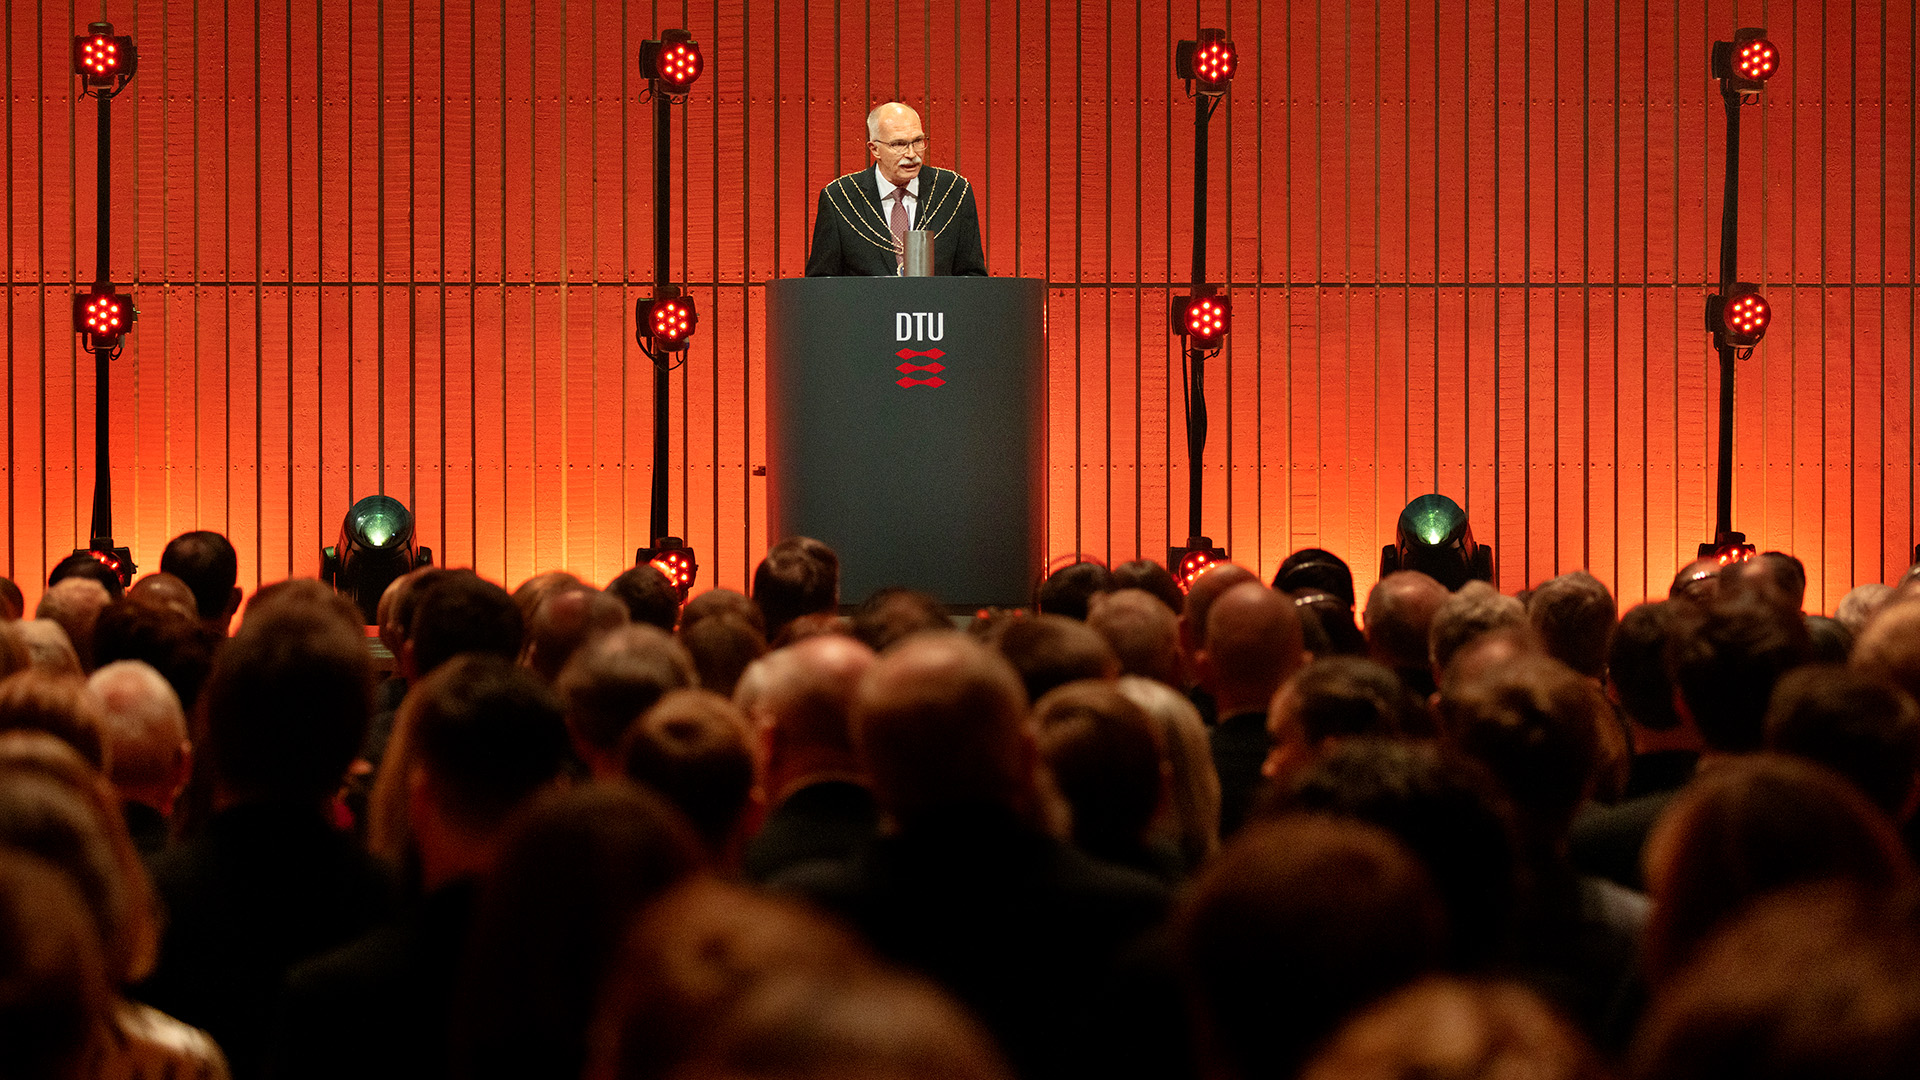 President Anders Bjarklev began the academic part of the Commemoration Day by, among other things, talking about the society of scarcity, the need for skilled engineers, and being physically back at DTU.